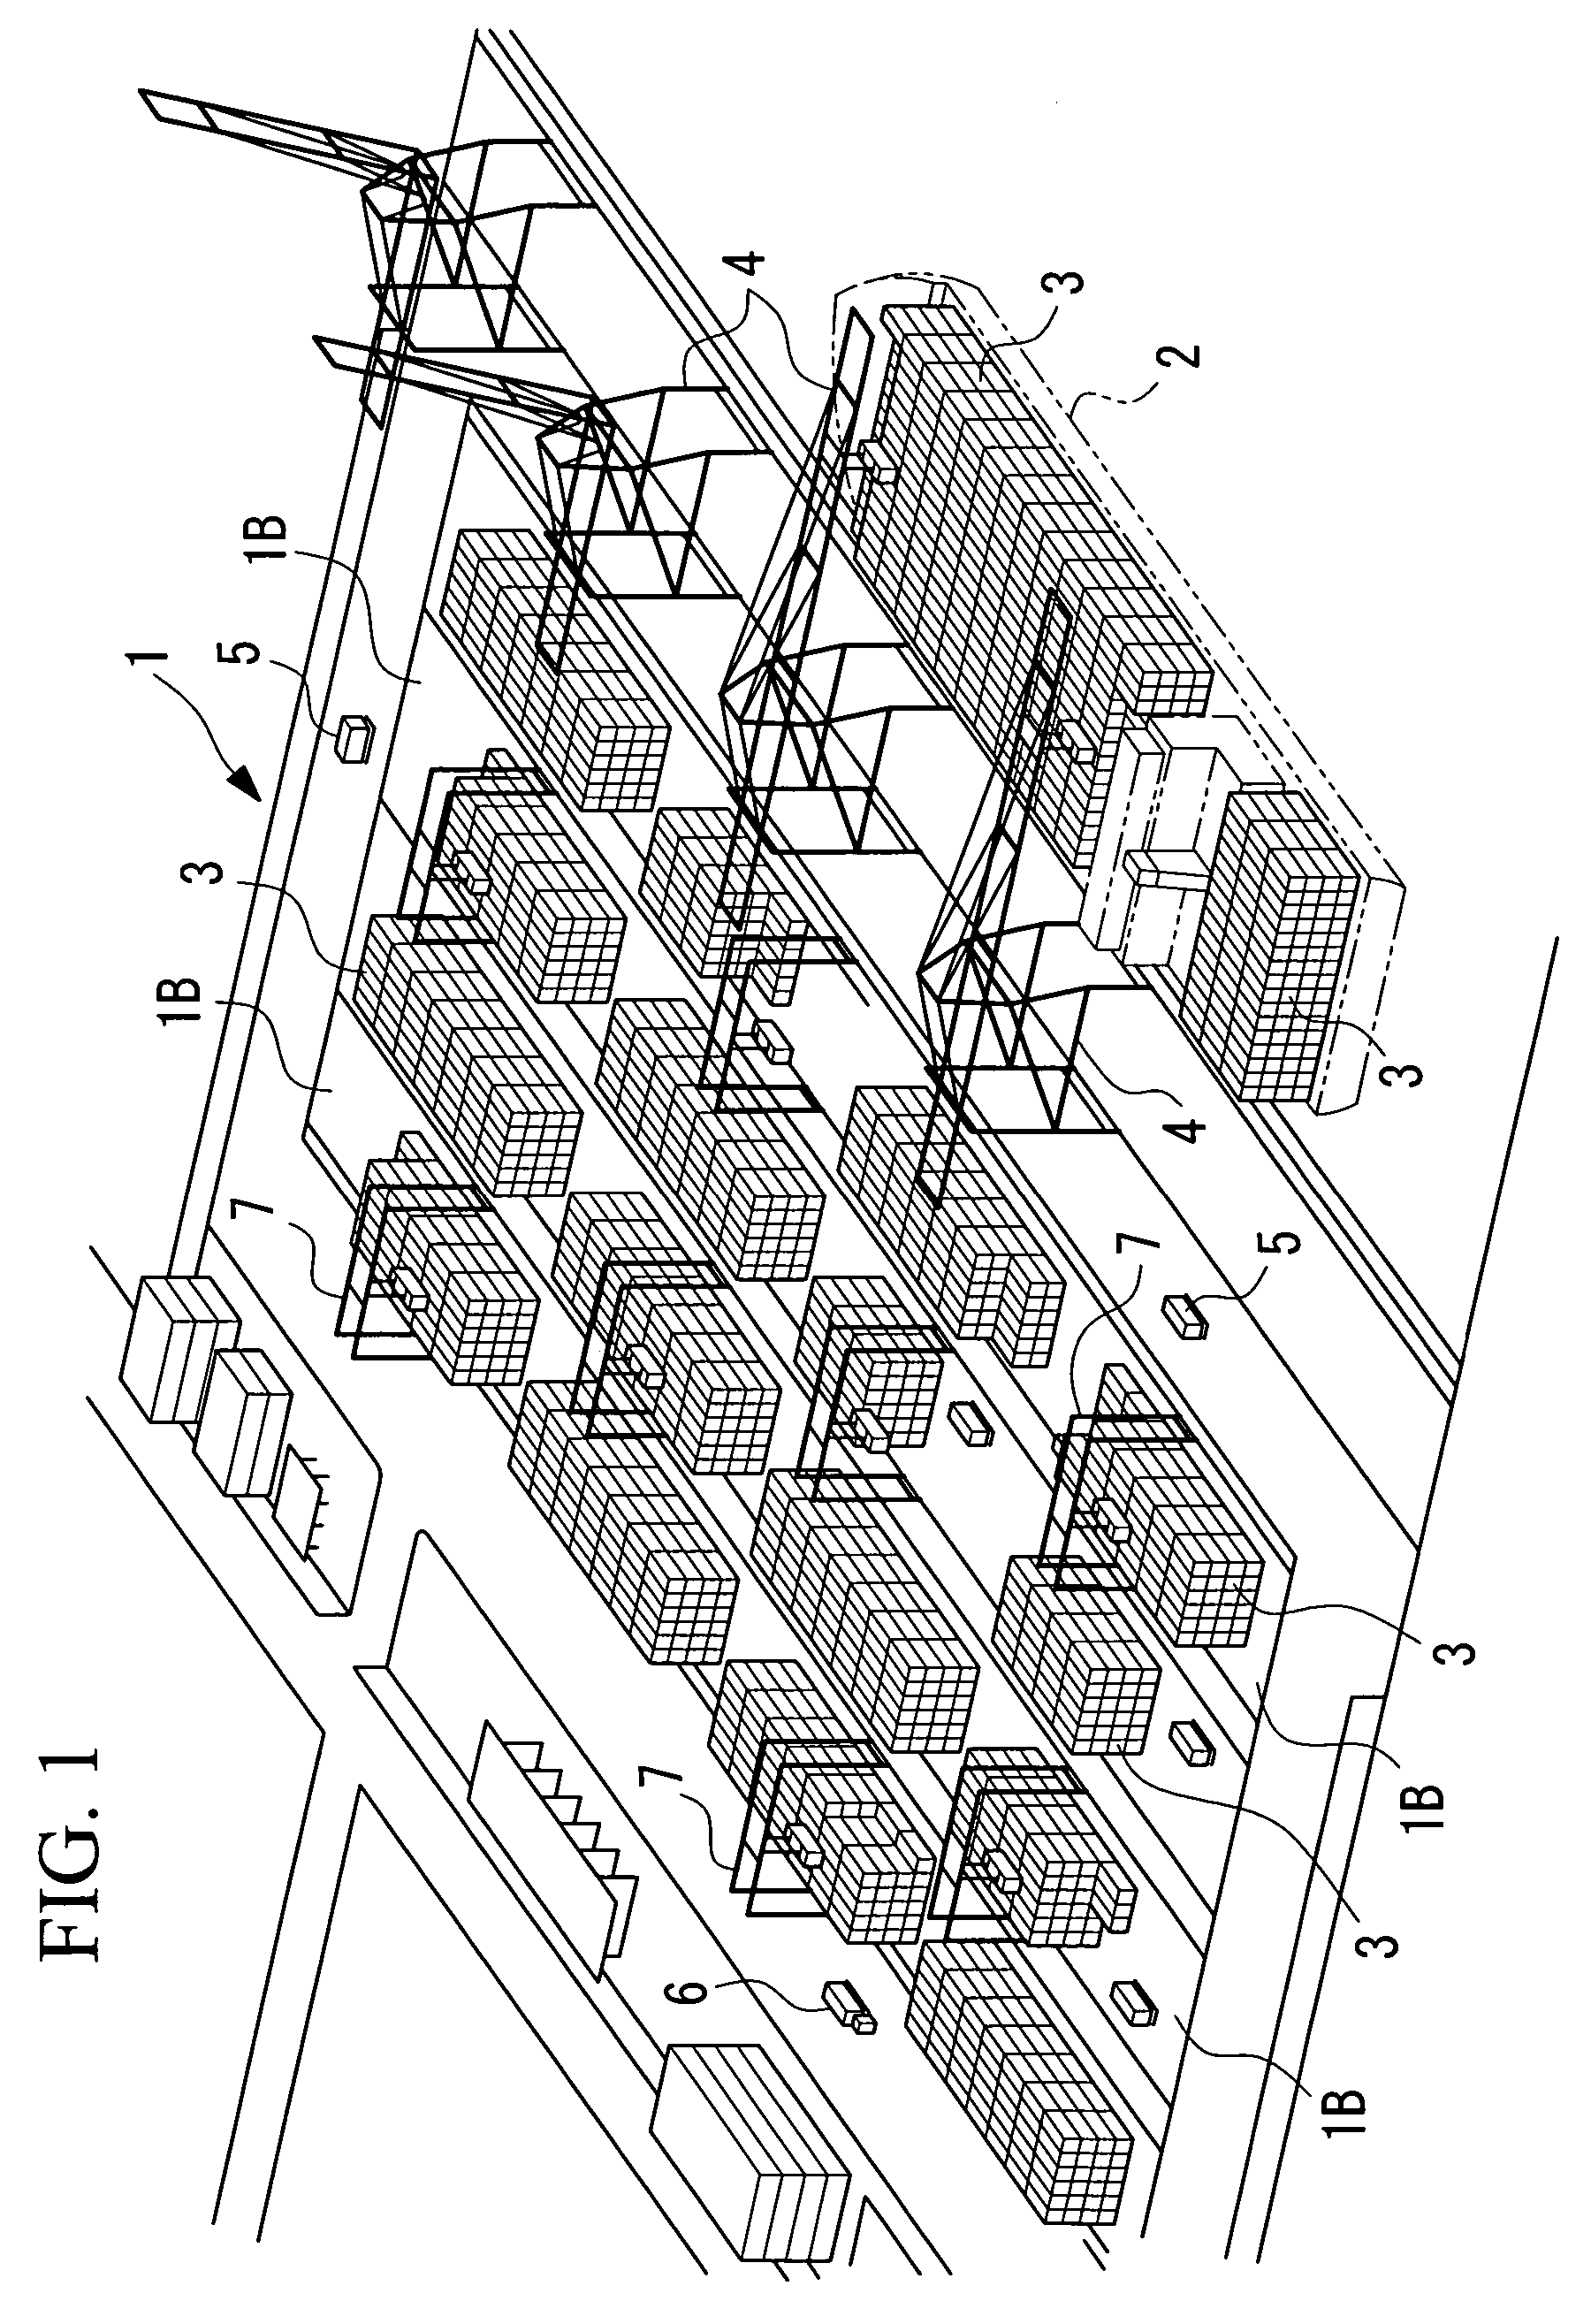 Container handling apparatus, container management system, and method of container handling